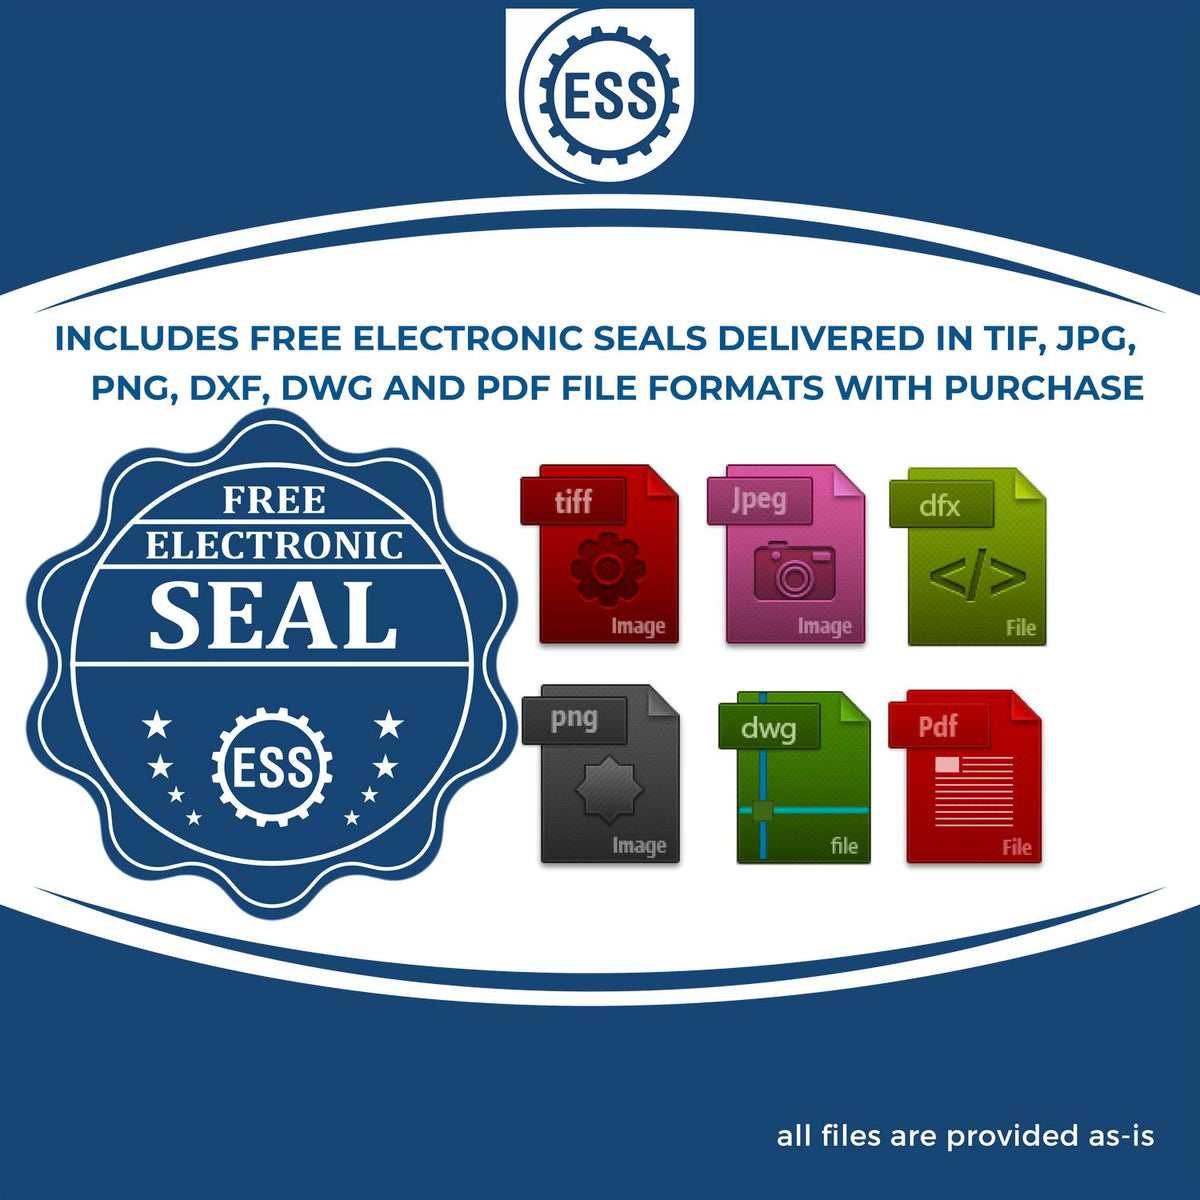 An infographic for the free electronic seal for the Gift New Jersey Engineer Seal illustrating the different file type icons such as DXF, DWG, TIF, JPG and PNG.